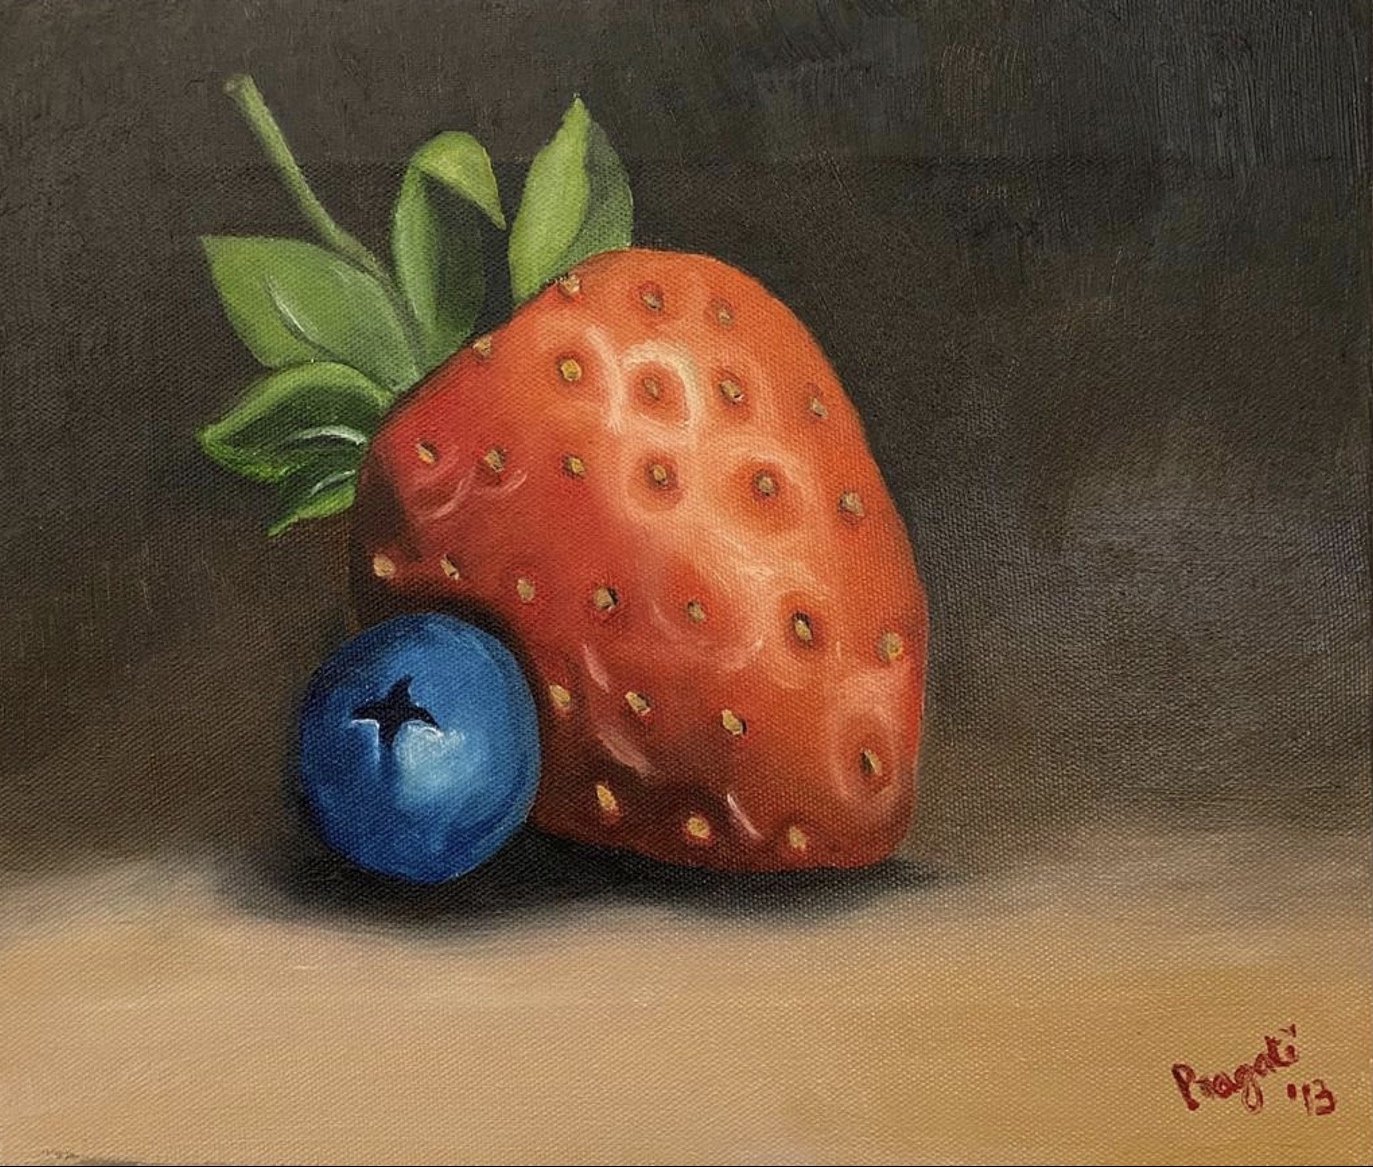 Strawberry and Blueberry - 2013